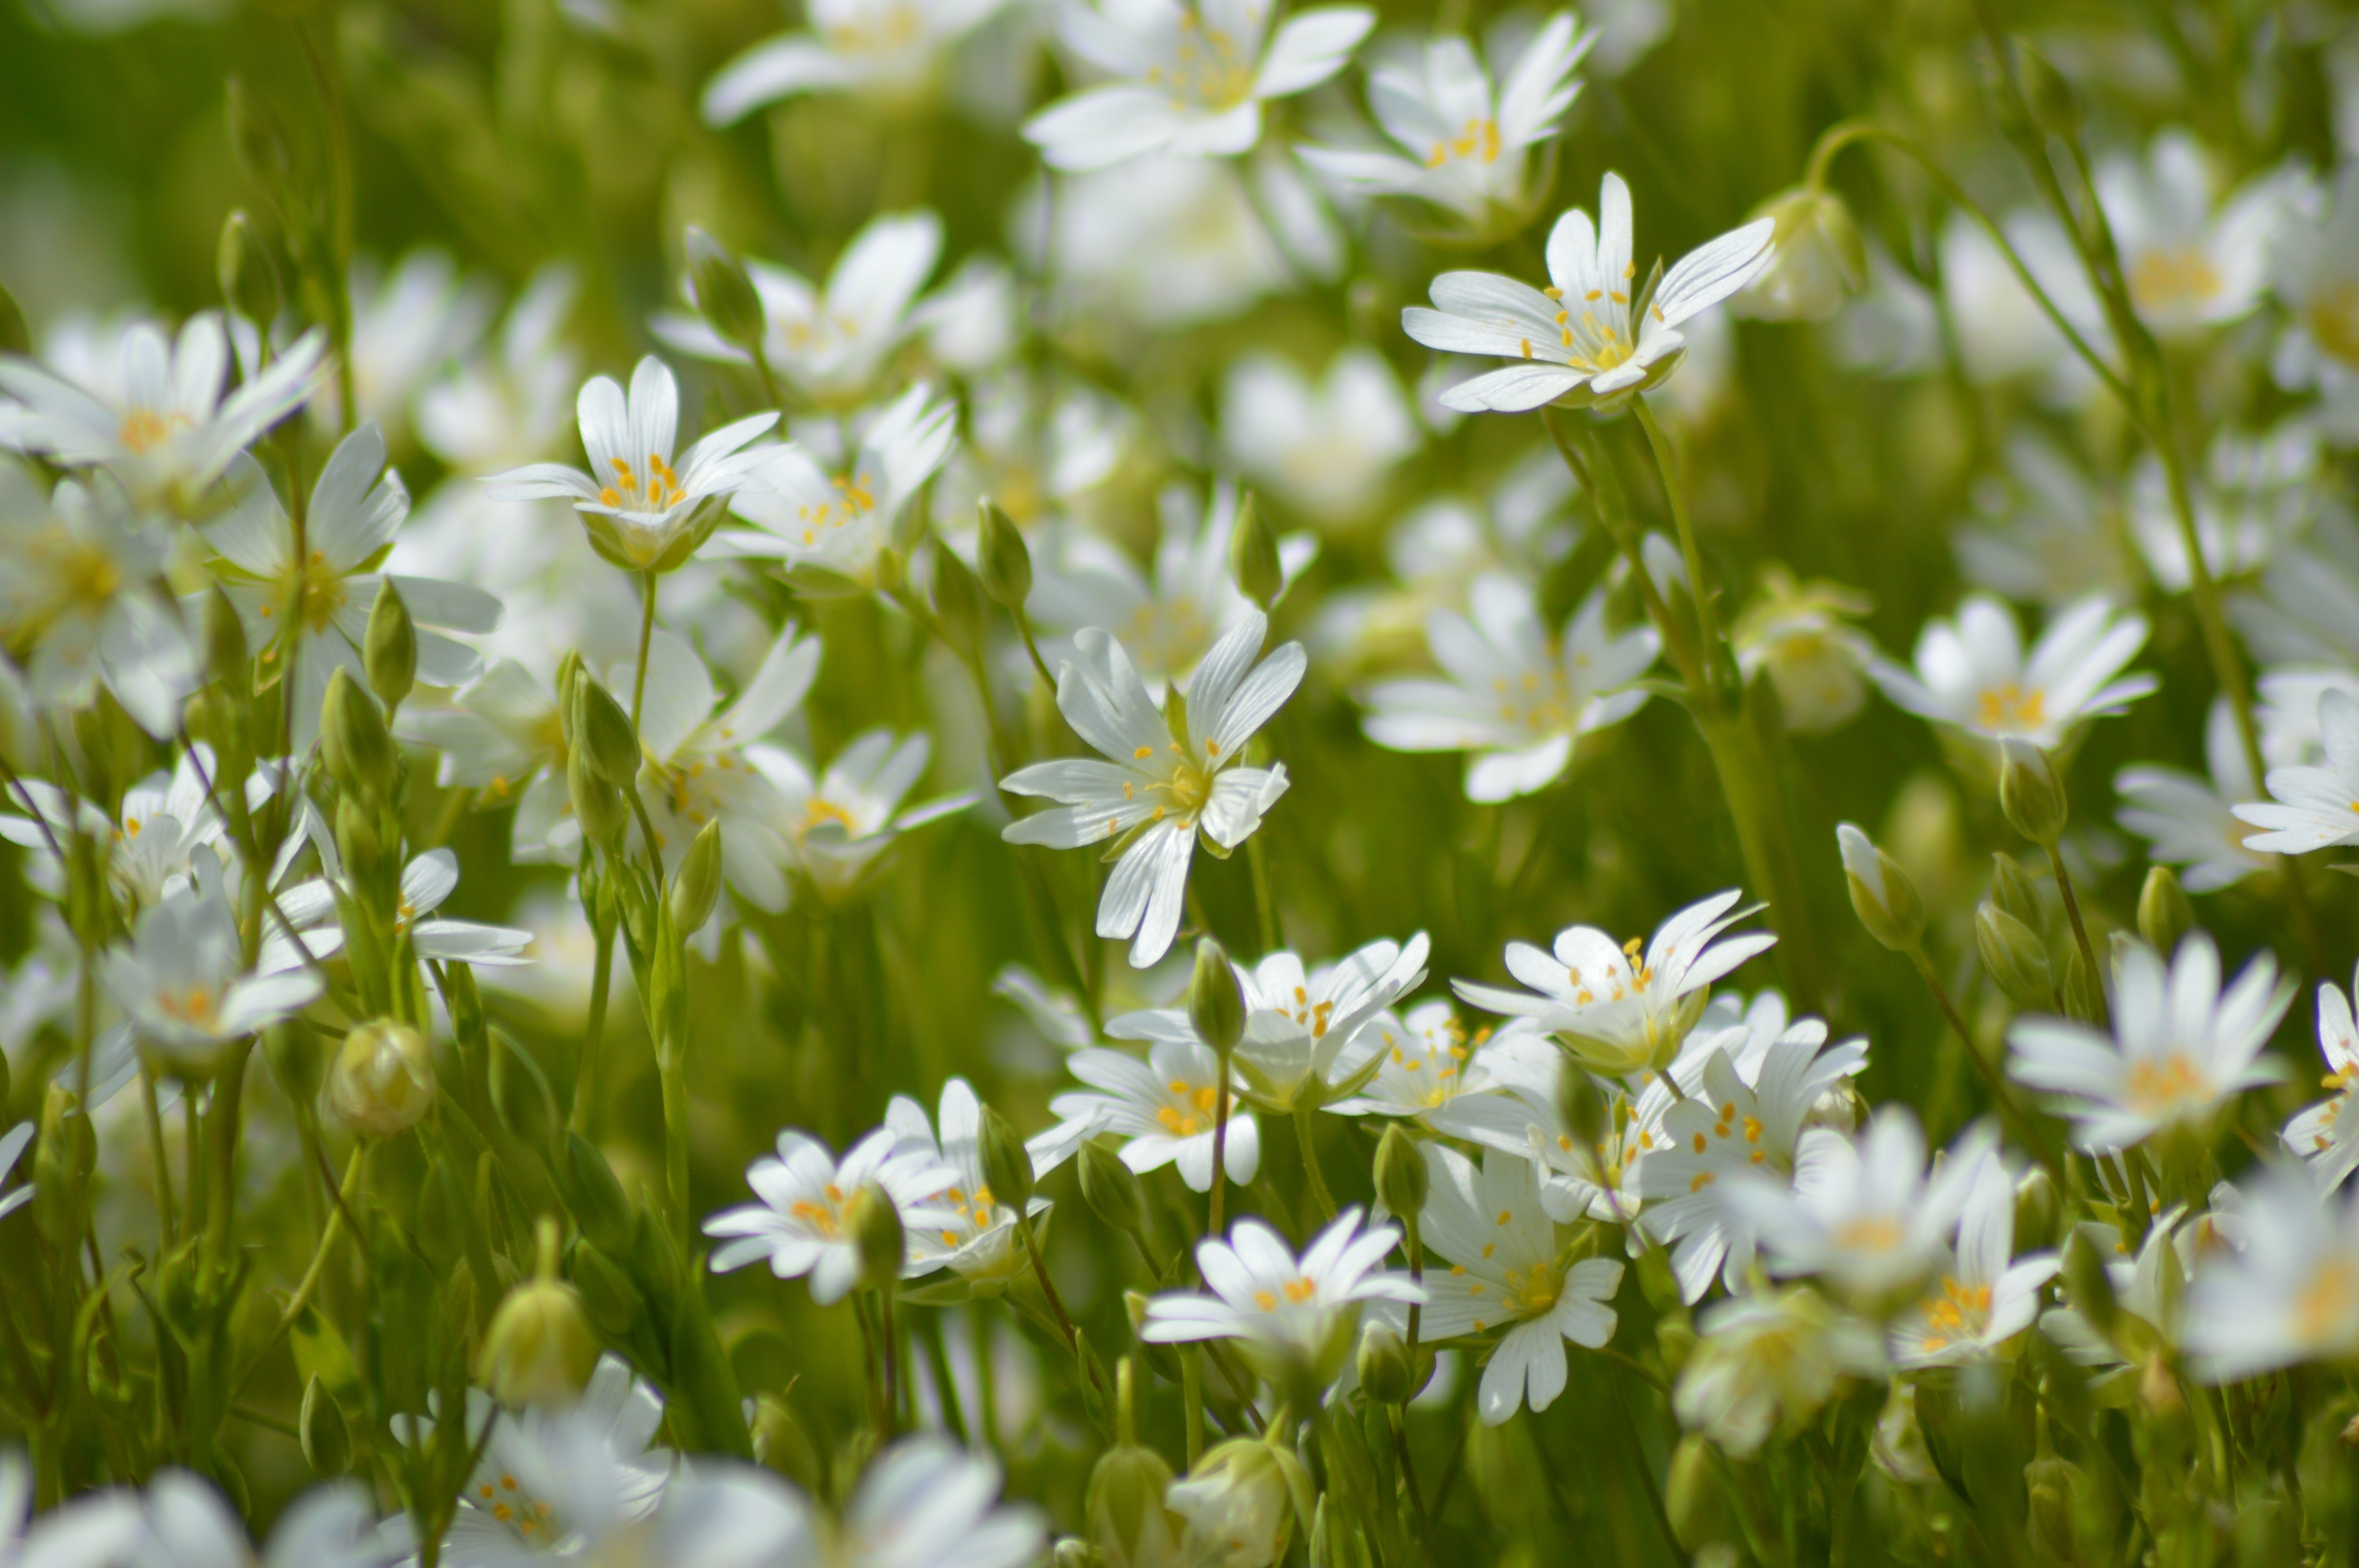 Wallpaper with white daisies on a green field